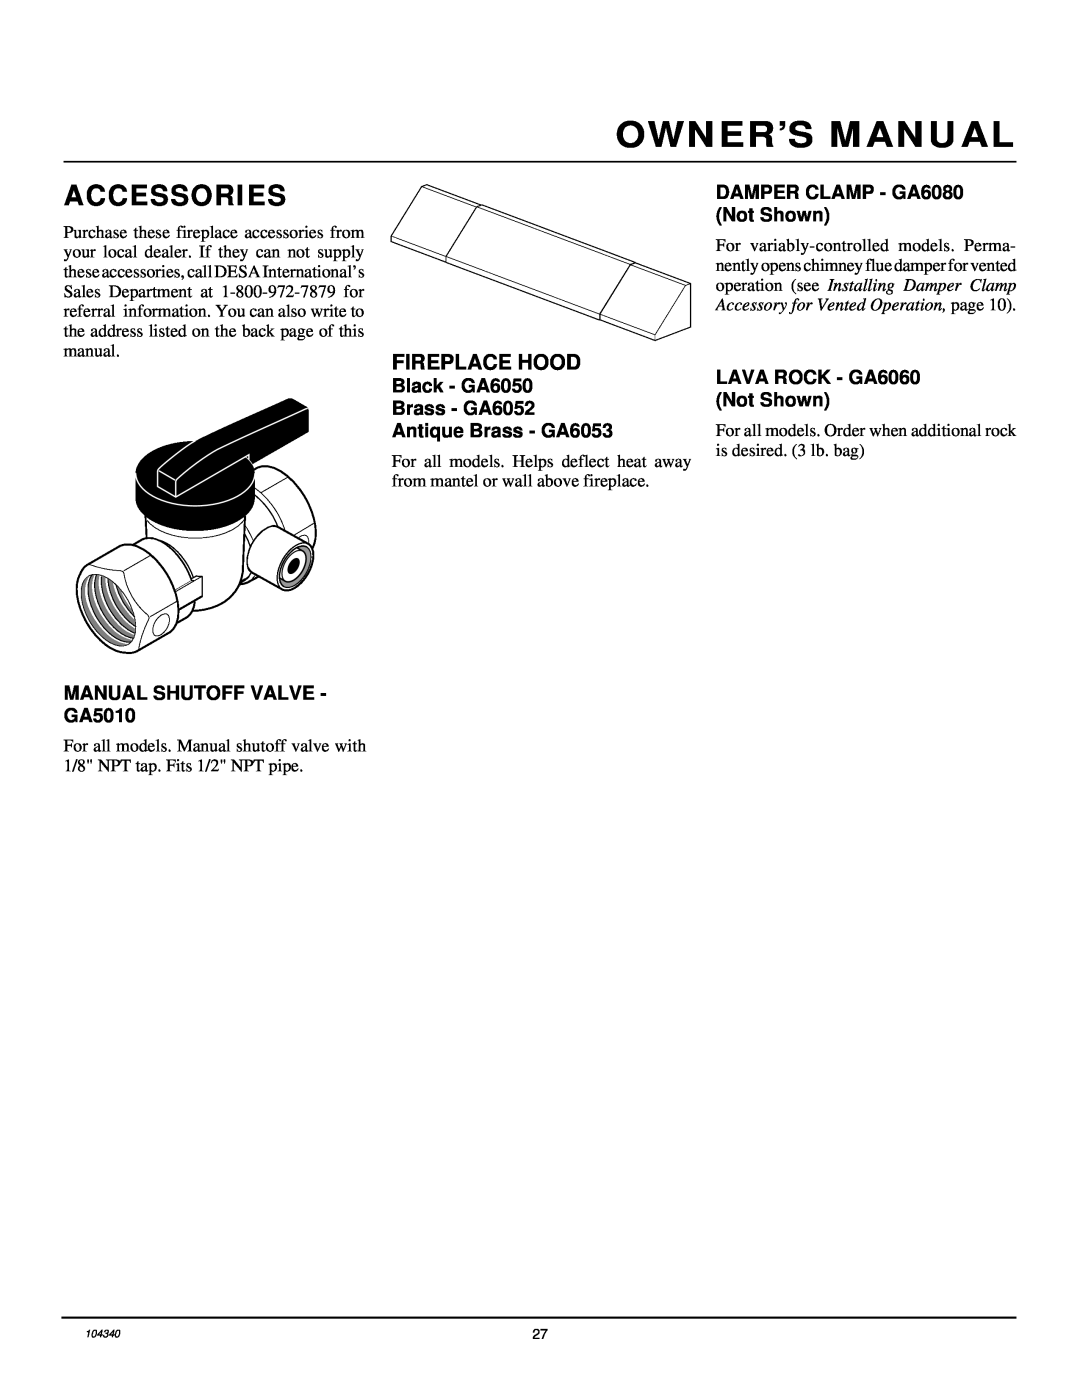 Desa CY2718N, CCL3924NT, CGD3930NT, CY3124N installation manual Accessories, Fireplace Hood 